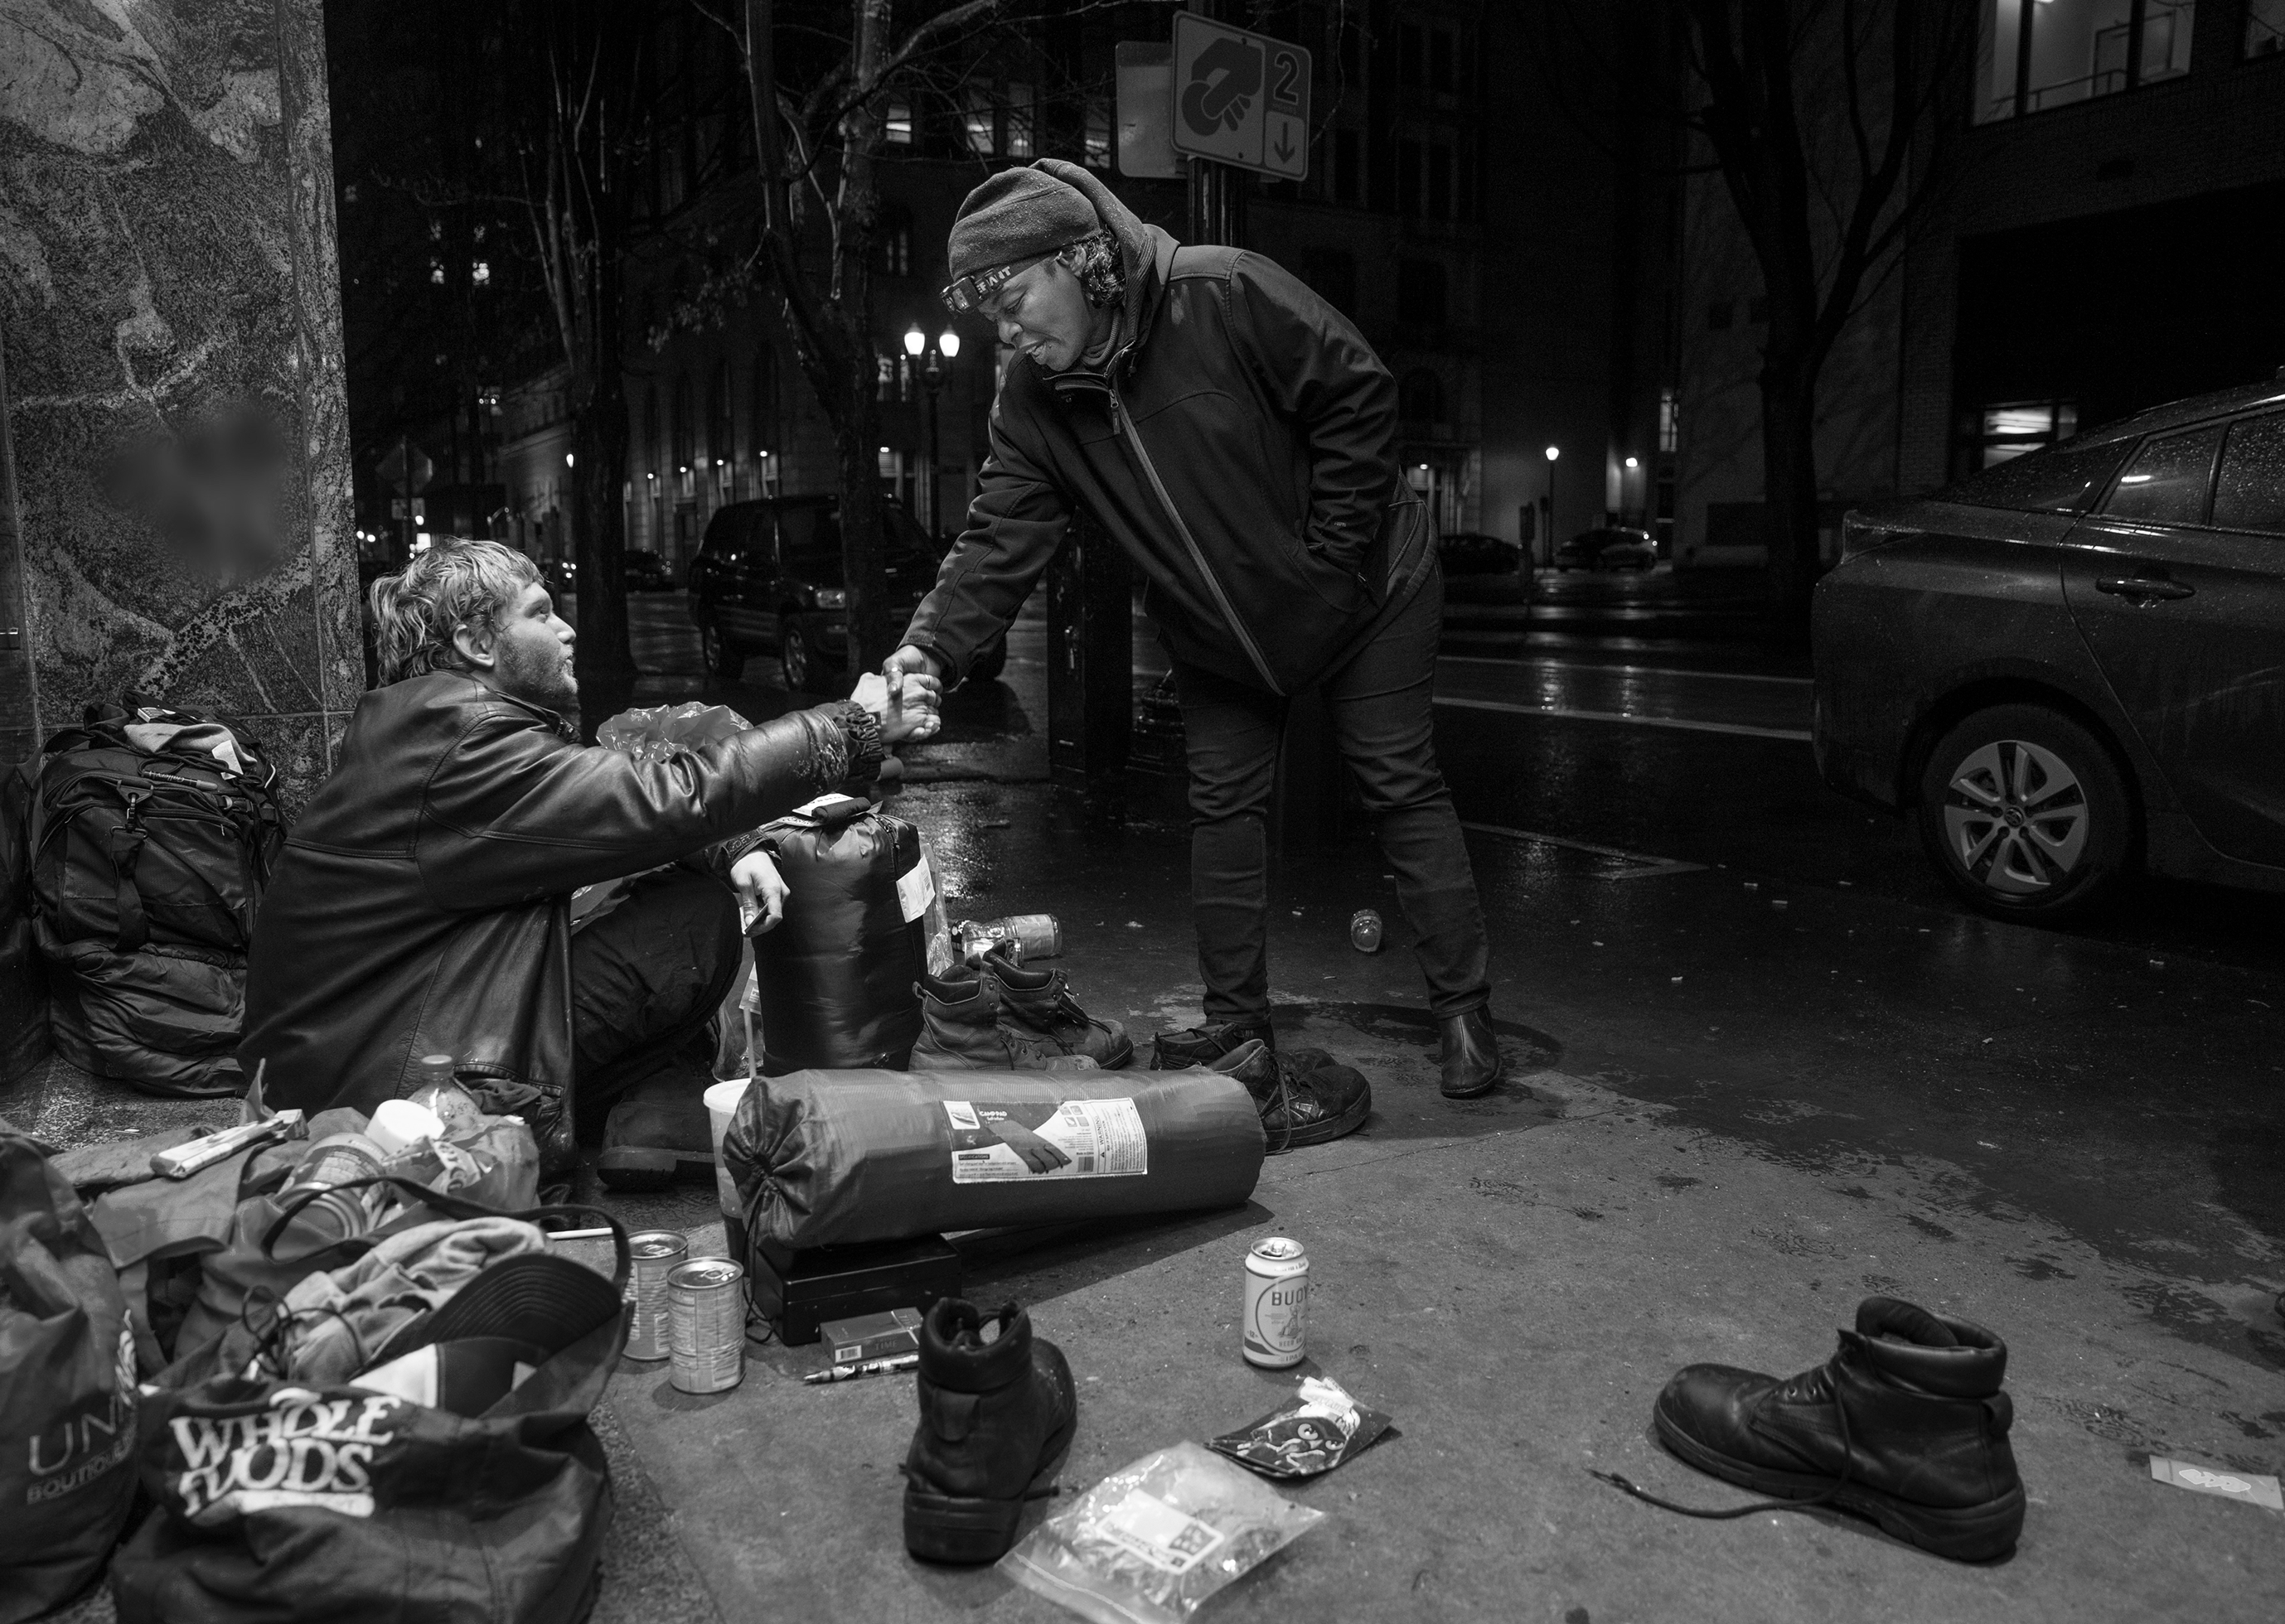 Person shaking hands with a person experiencing homelessness